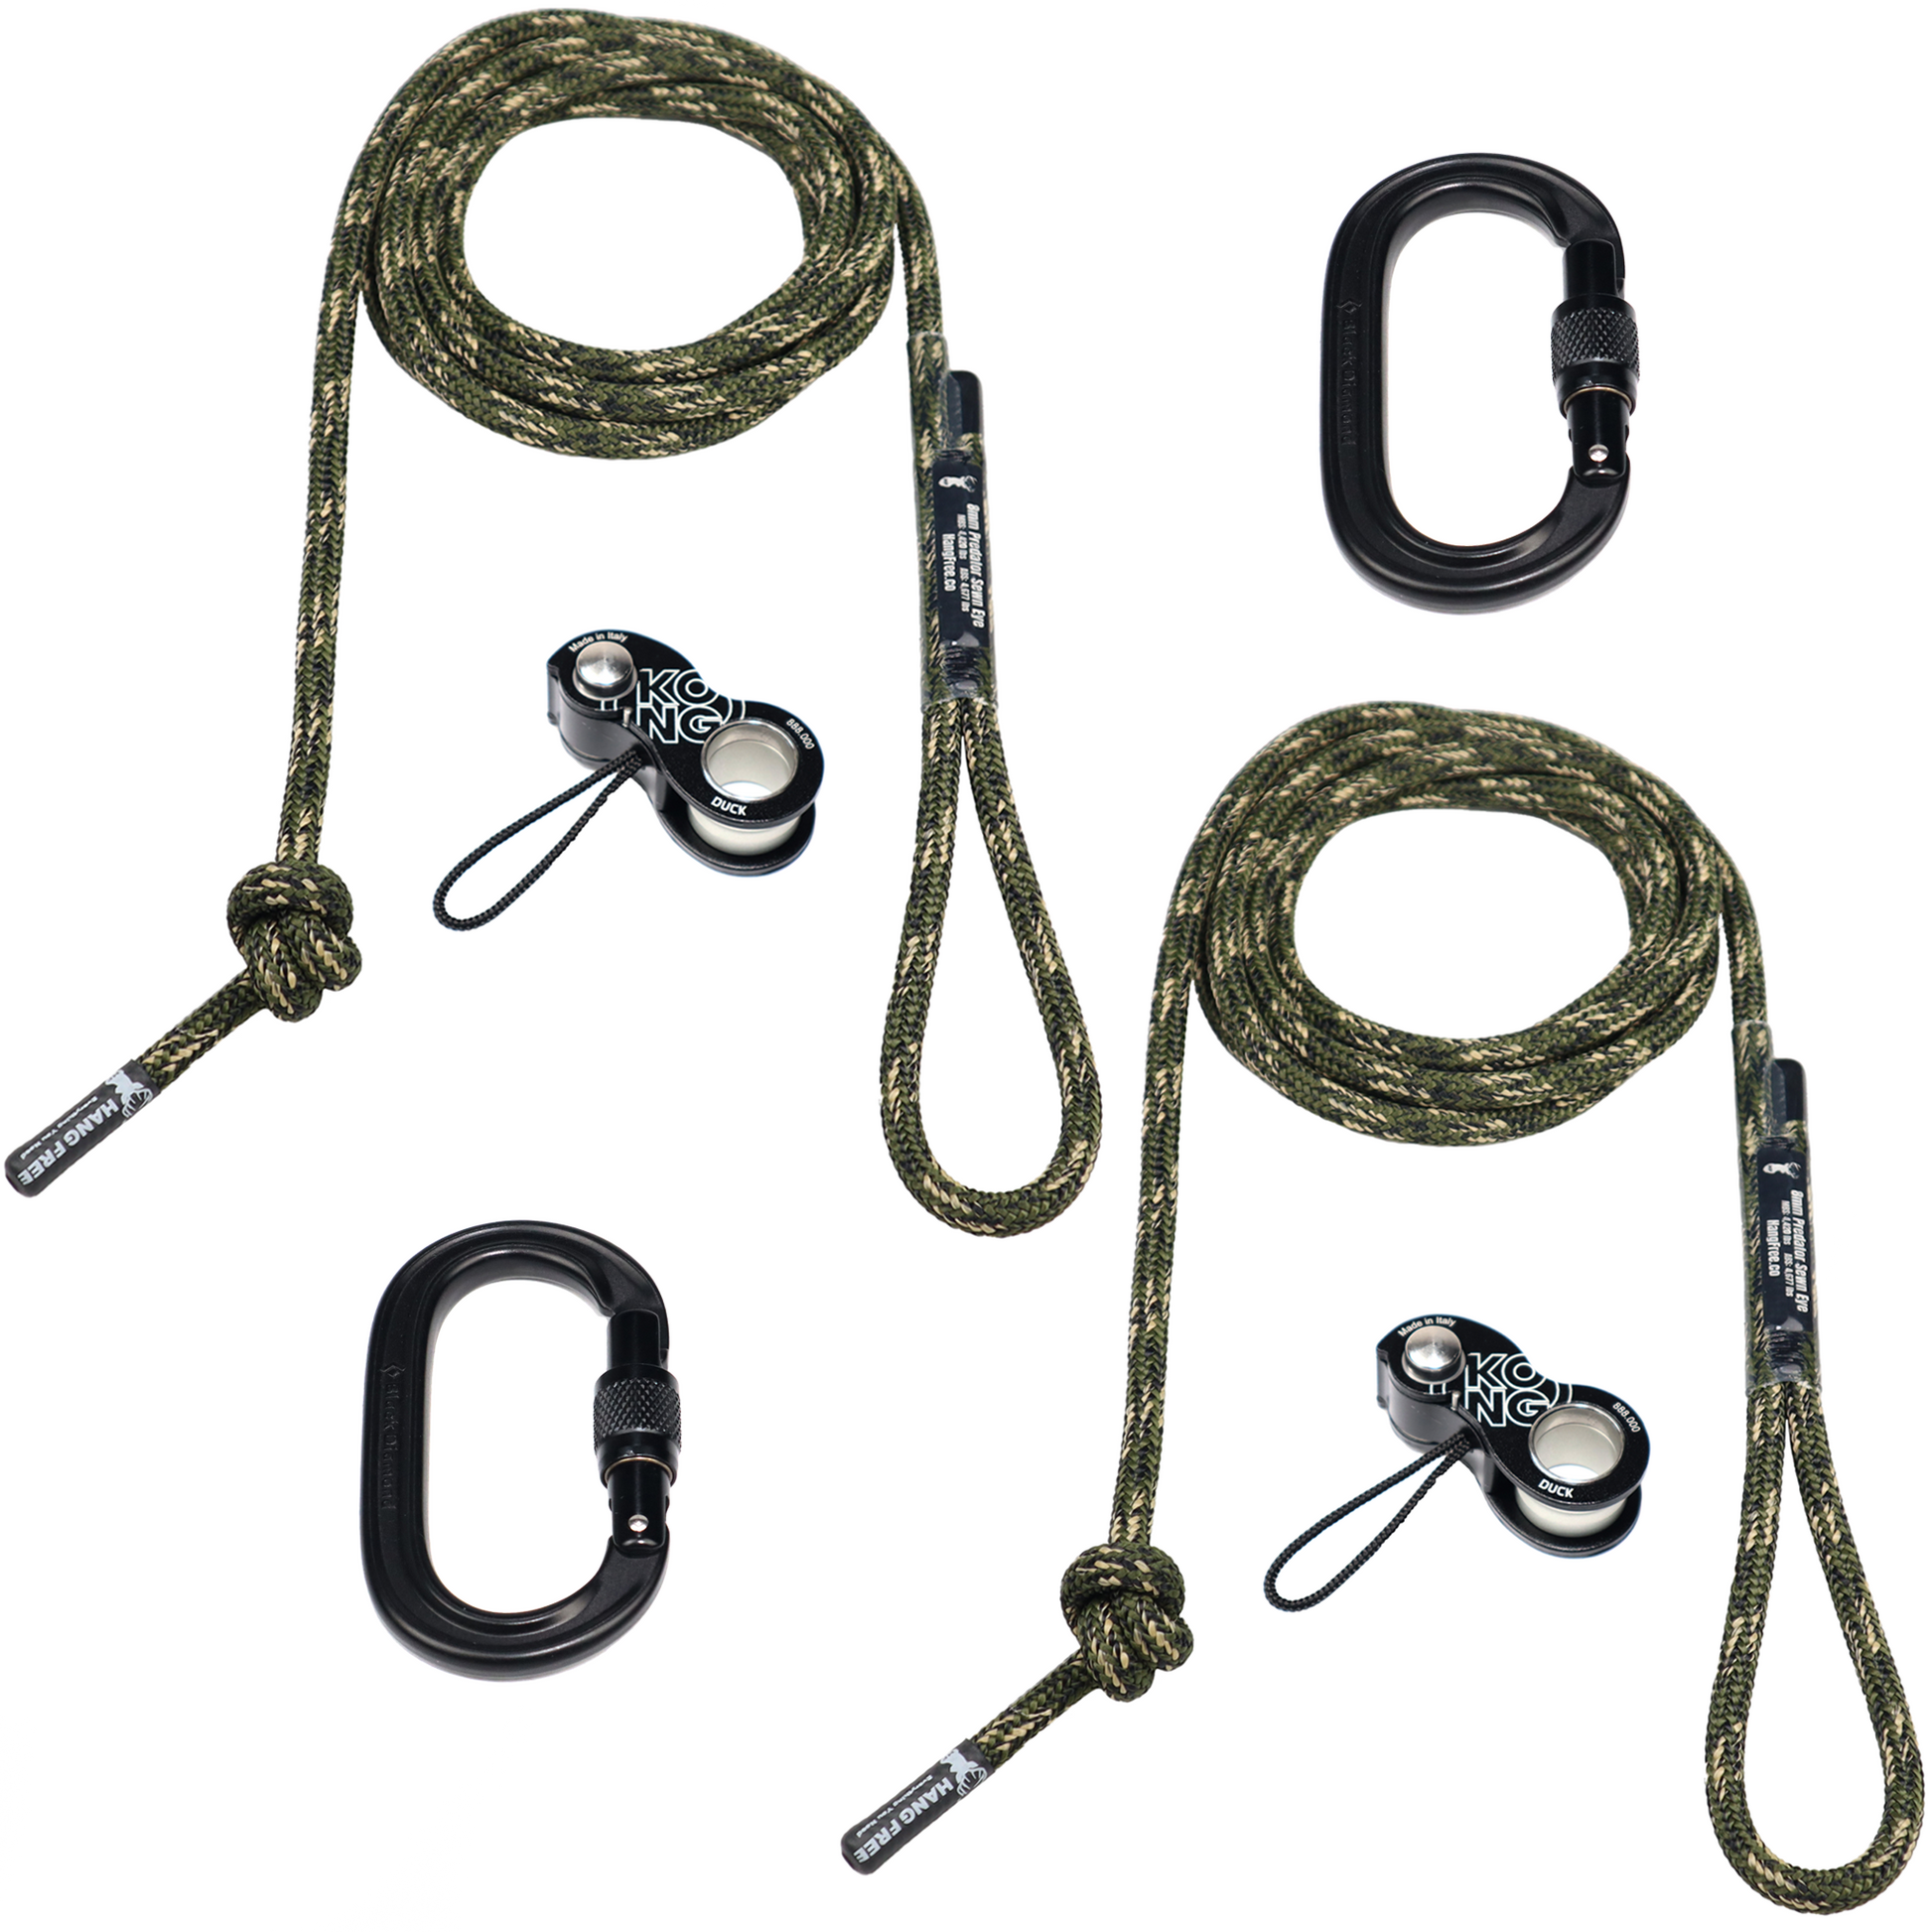 Deluxe Predator Tether and Lineman's Package with Kong Ducks and Carabiners in Predator Camo